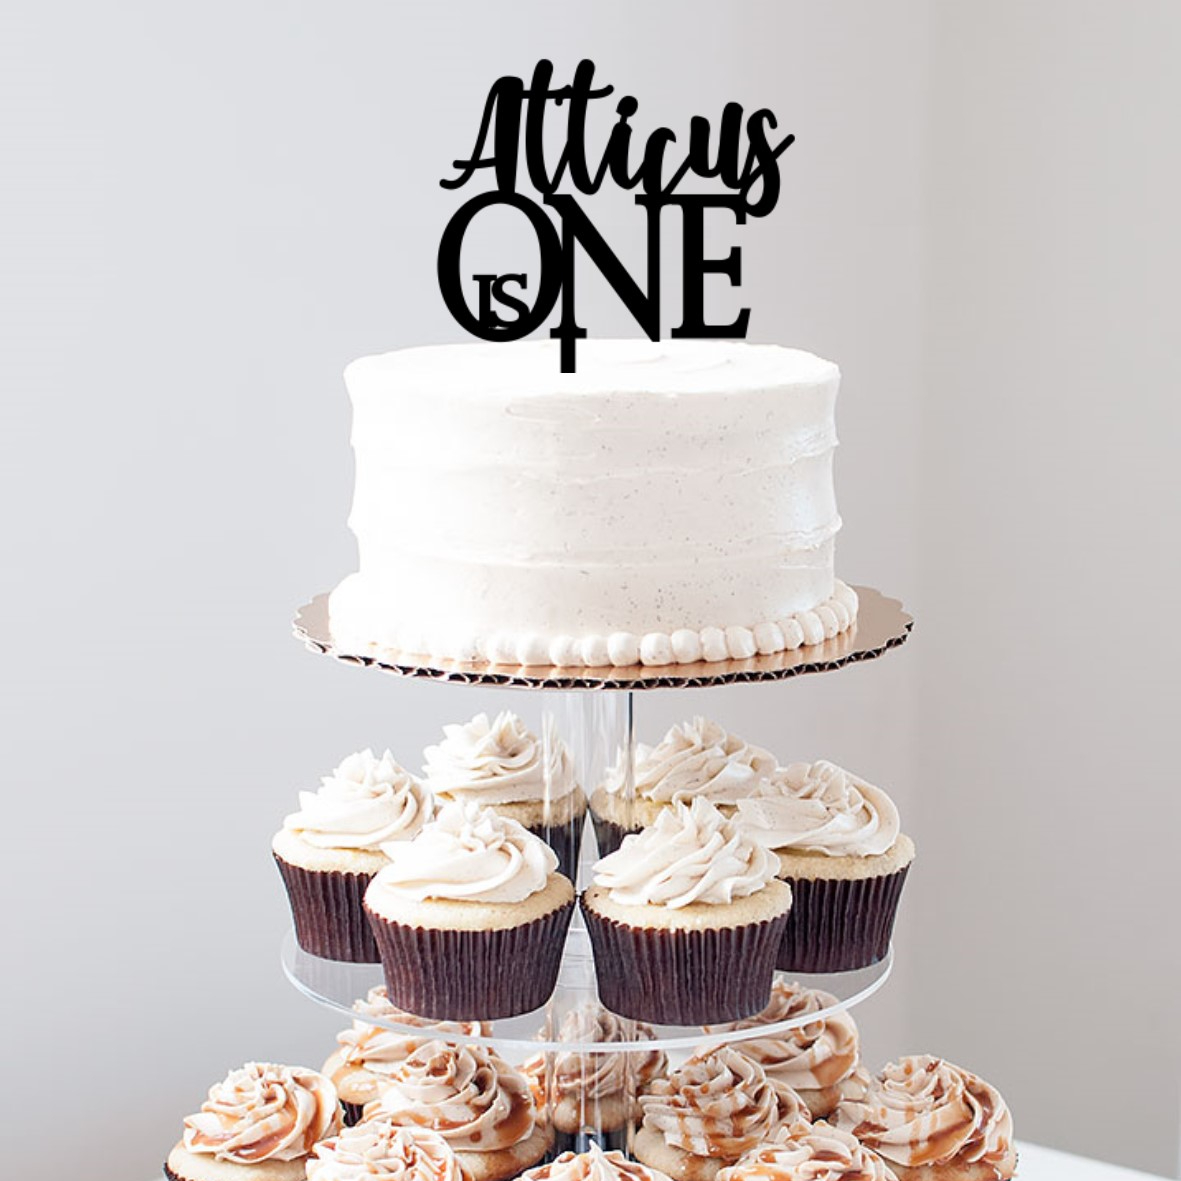 Quick Creations Cake Topper - Atticus is One